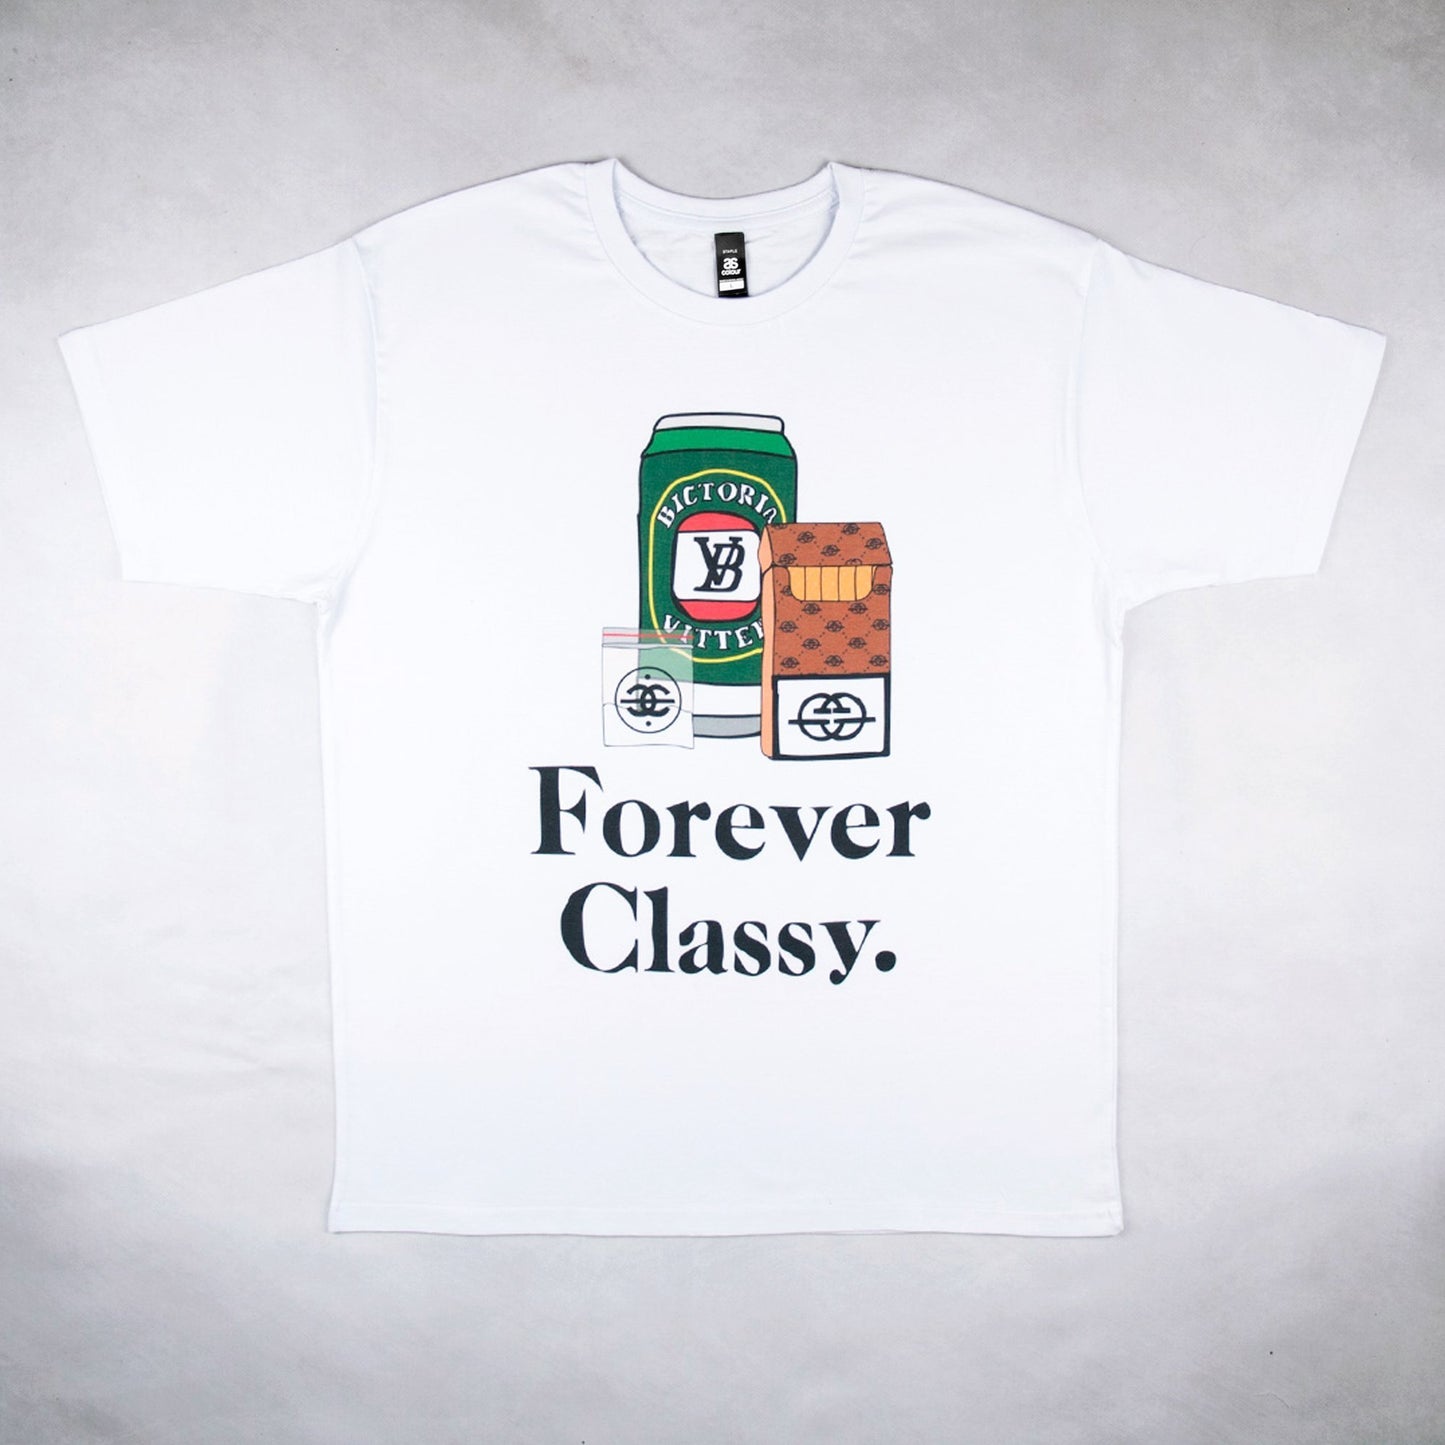 Classy Duds Short Sleeve T-Shirts Forever Classy Tee